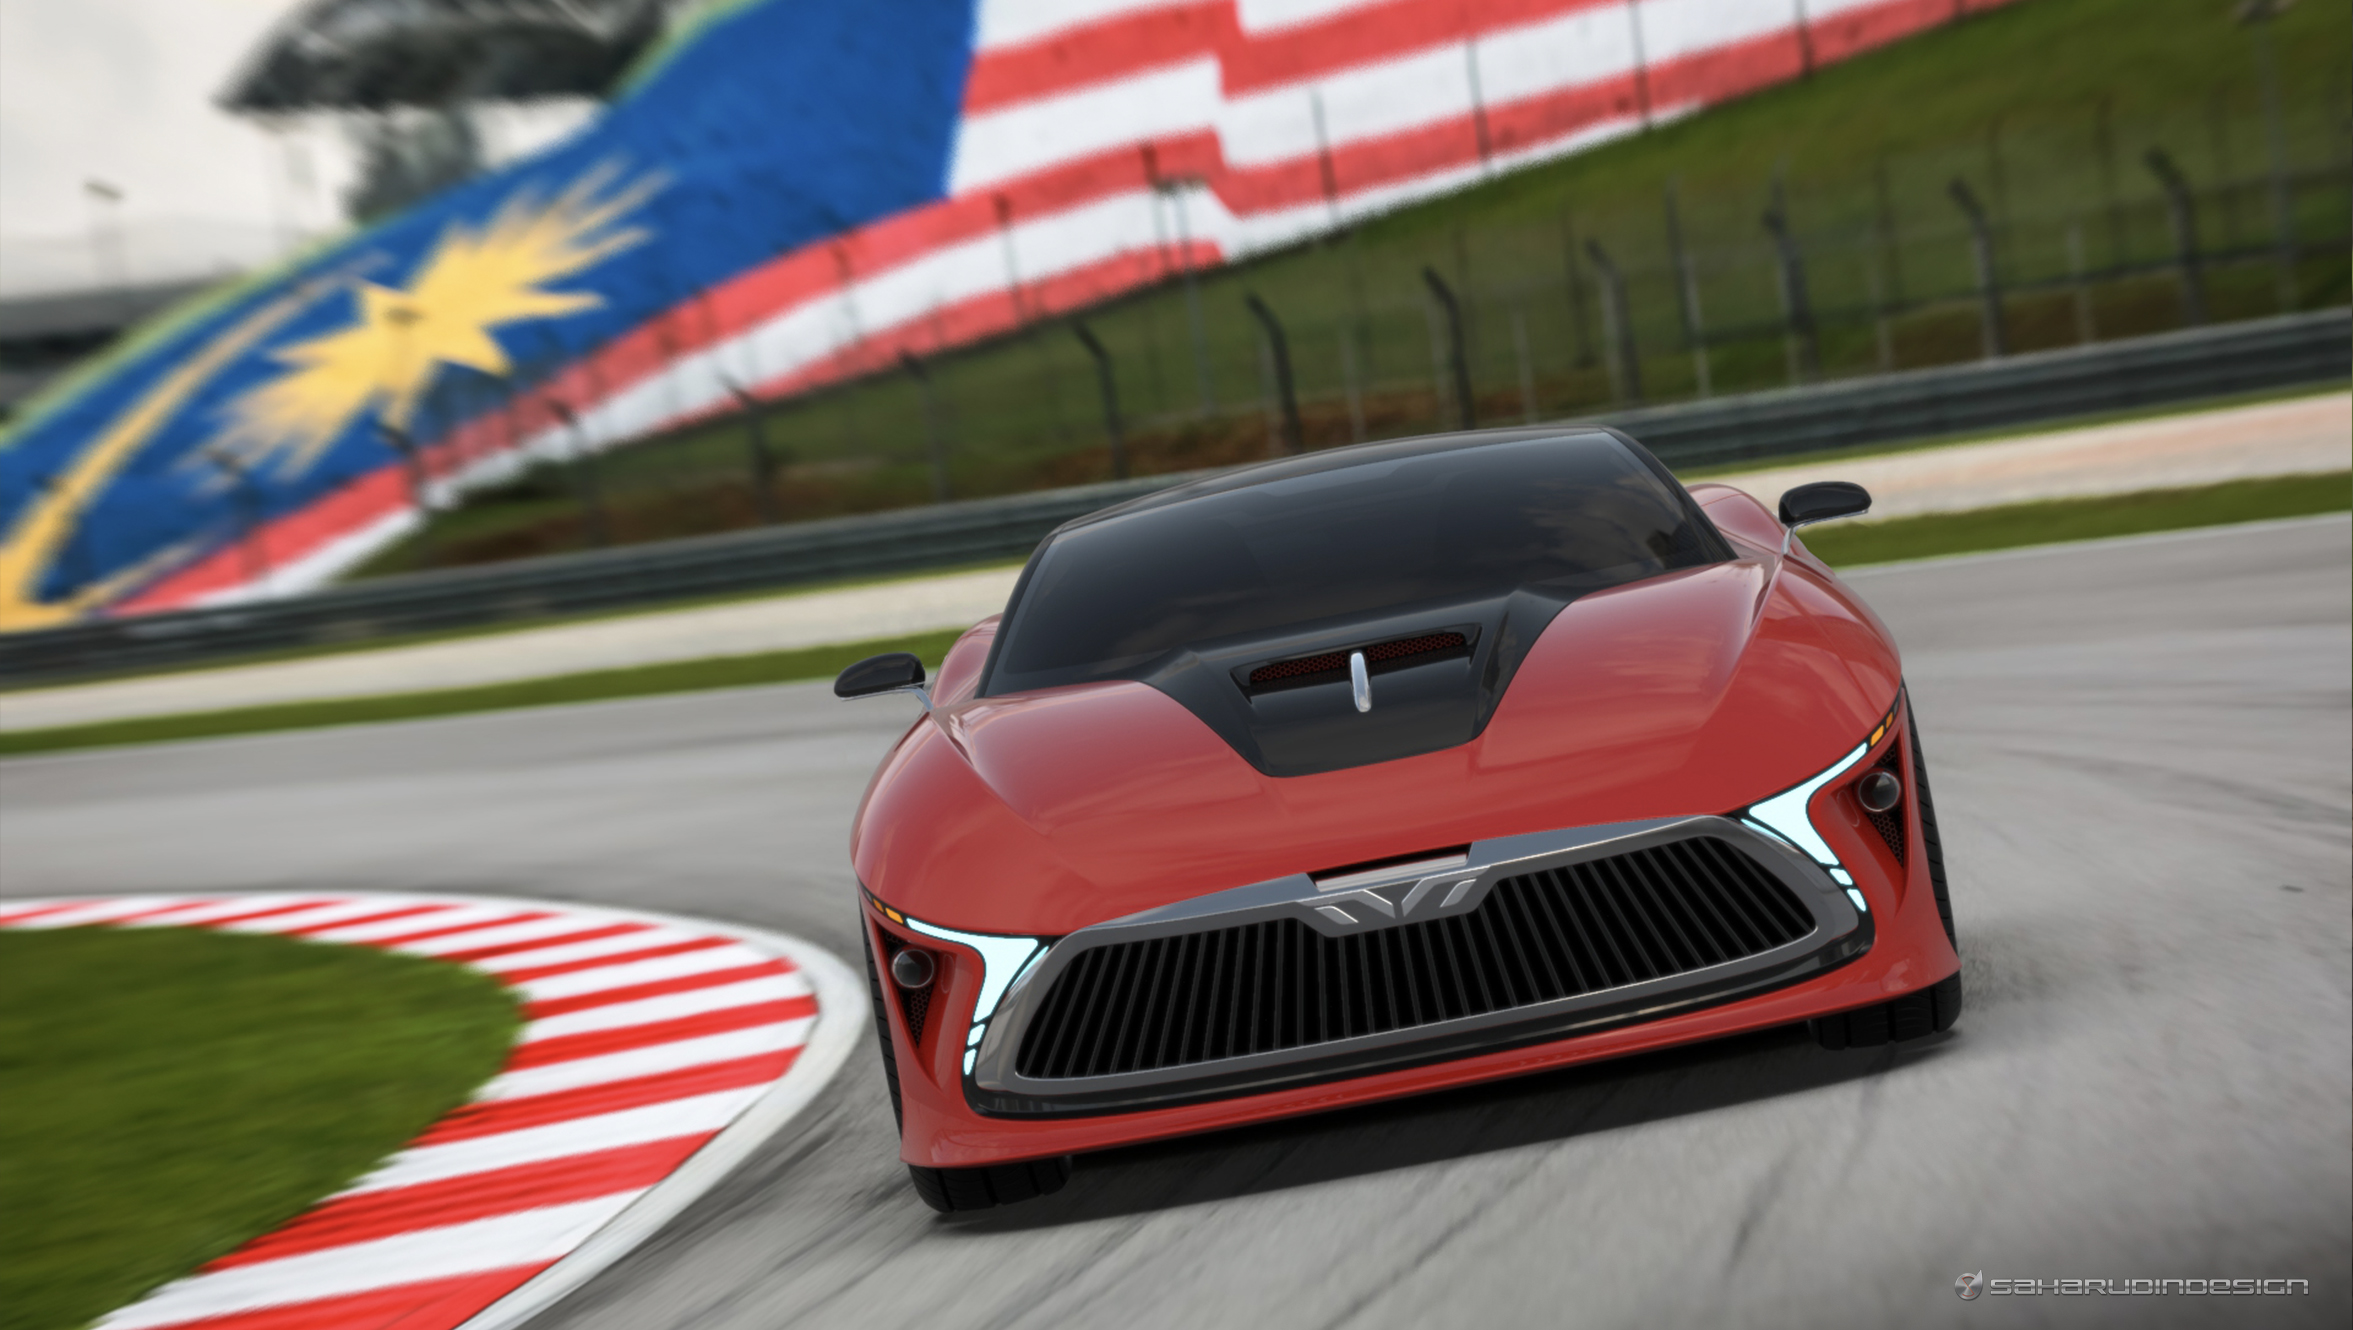 Malaysian sports car concept rendered by former Proton designer - inspired  by Aston Martin DB10 